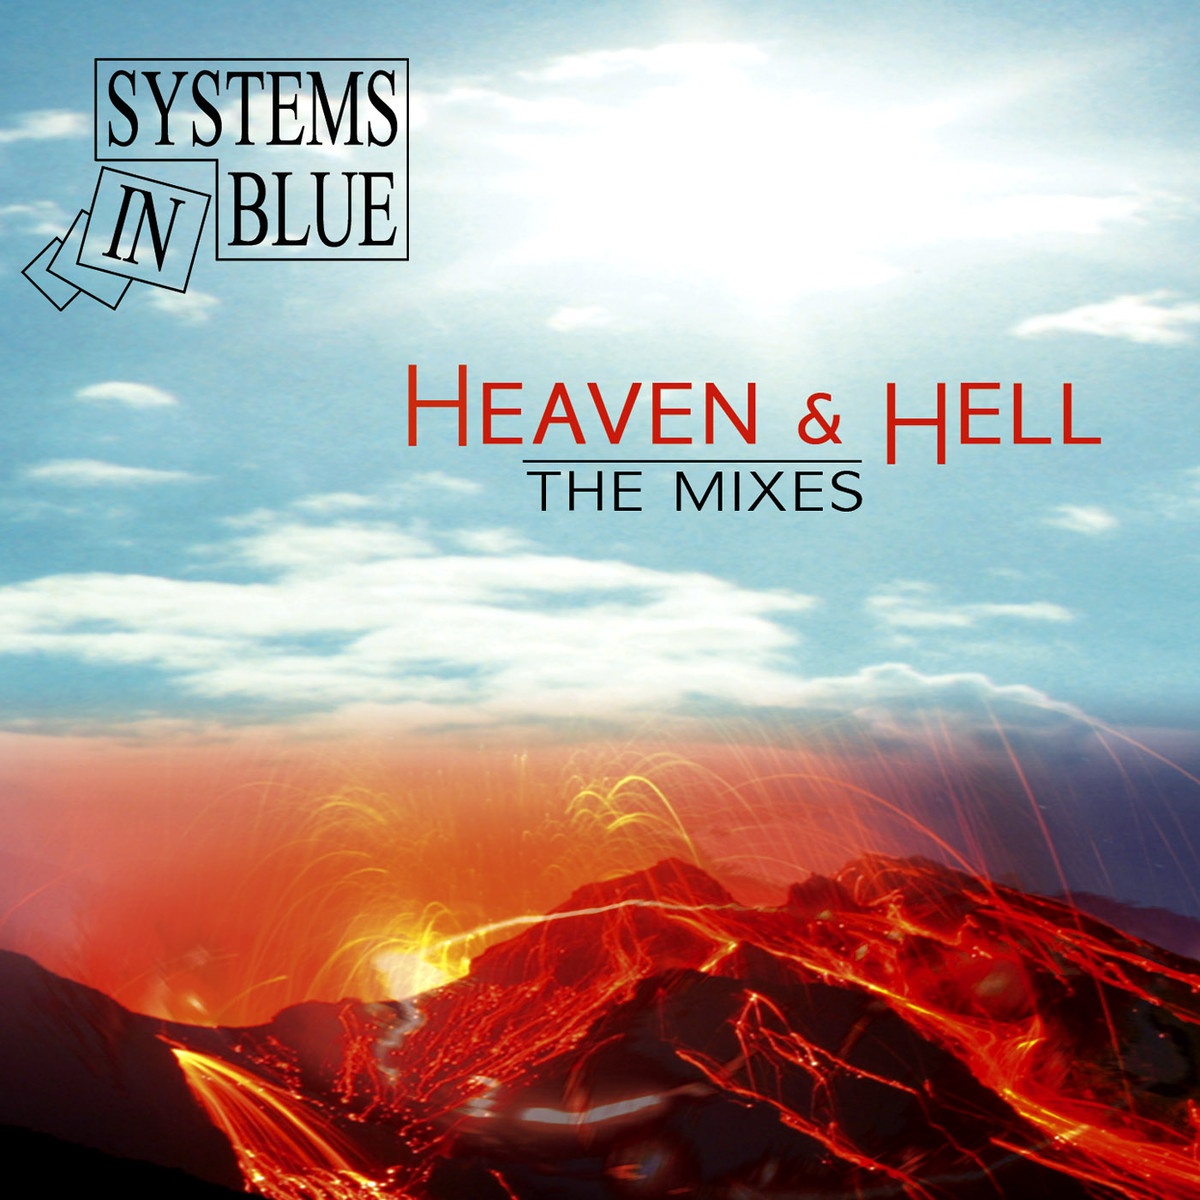 Heaven & Hell - Remastered 2009 Version